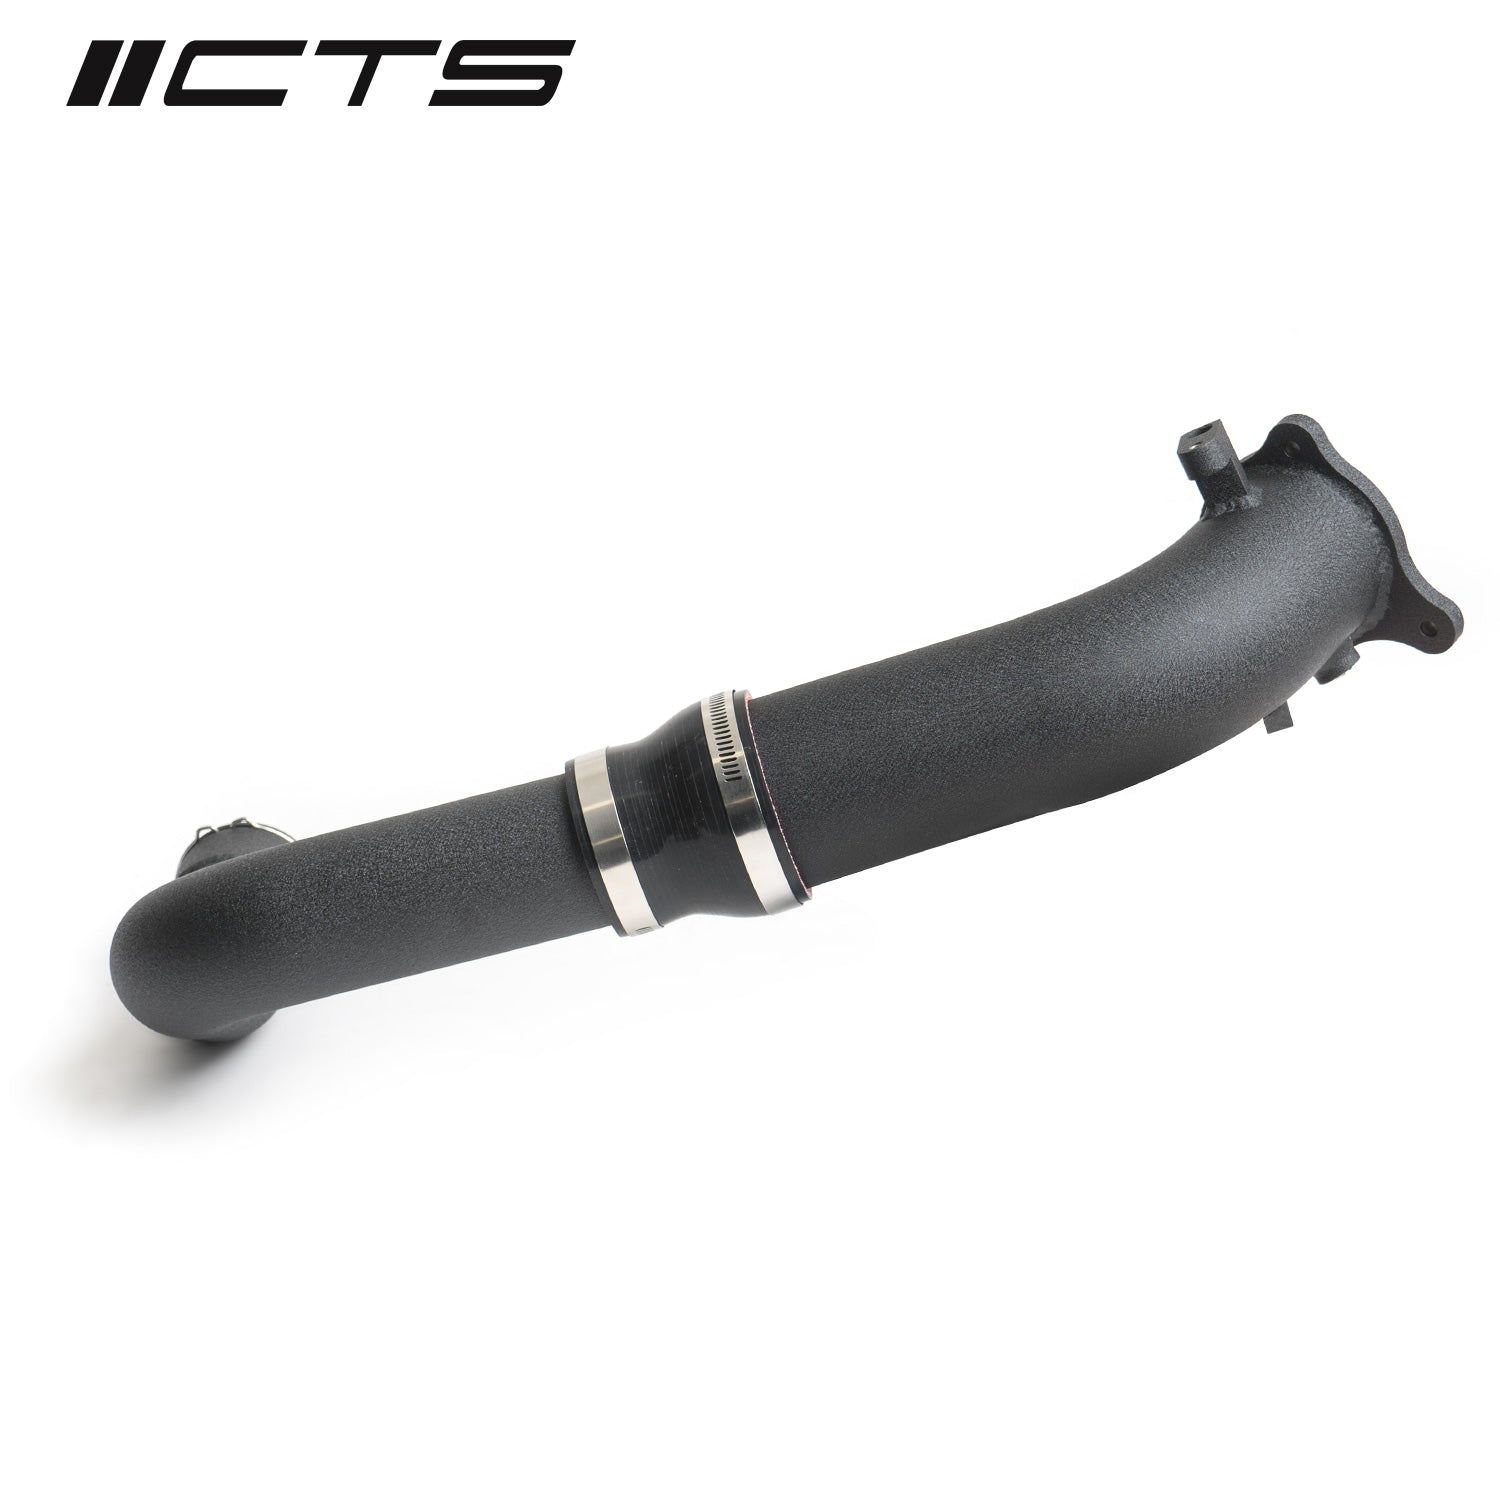 CTS TURBO CHARGE PIPE UPGRADE KIT FOR F-SERIES AND G-SERIES BMW B46/B48 2.0T